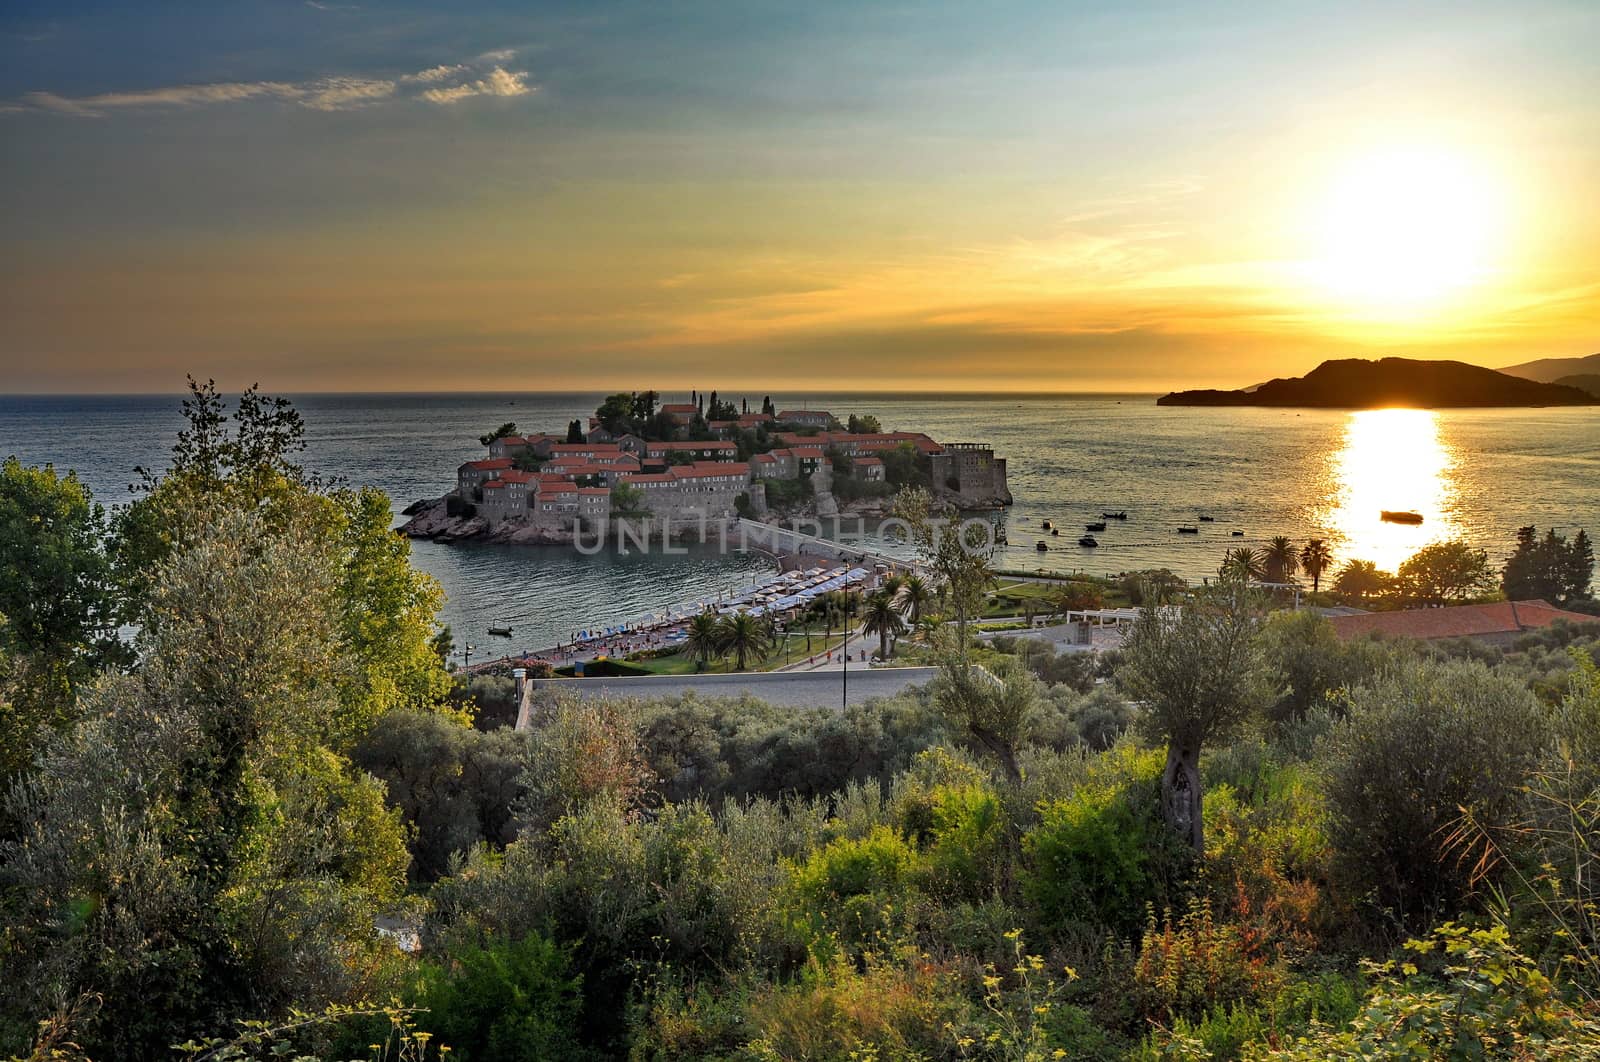 Old town of Sveti Stefan in Montenegro by anderm